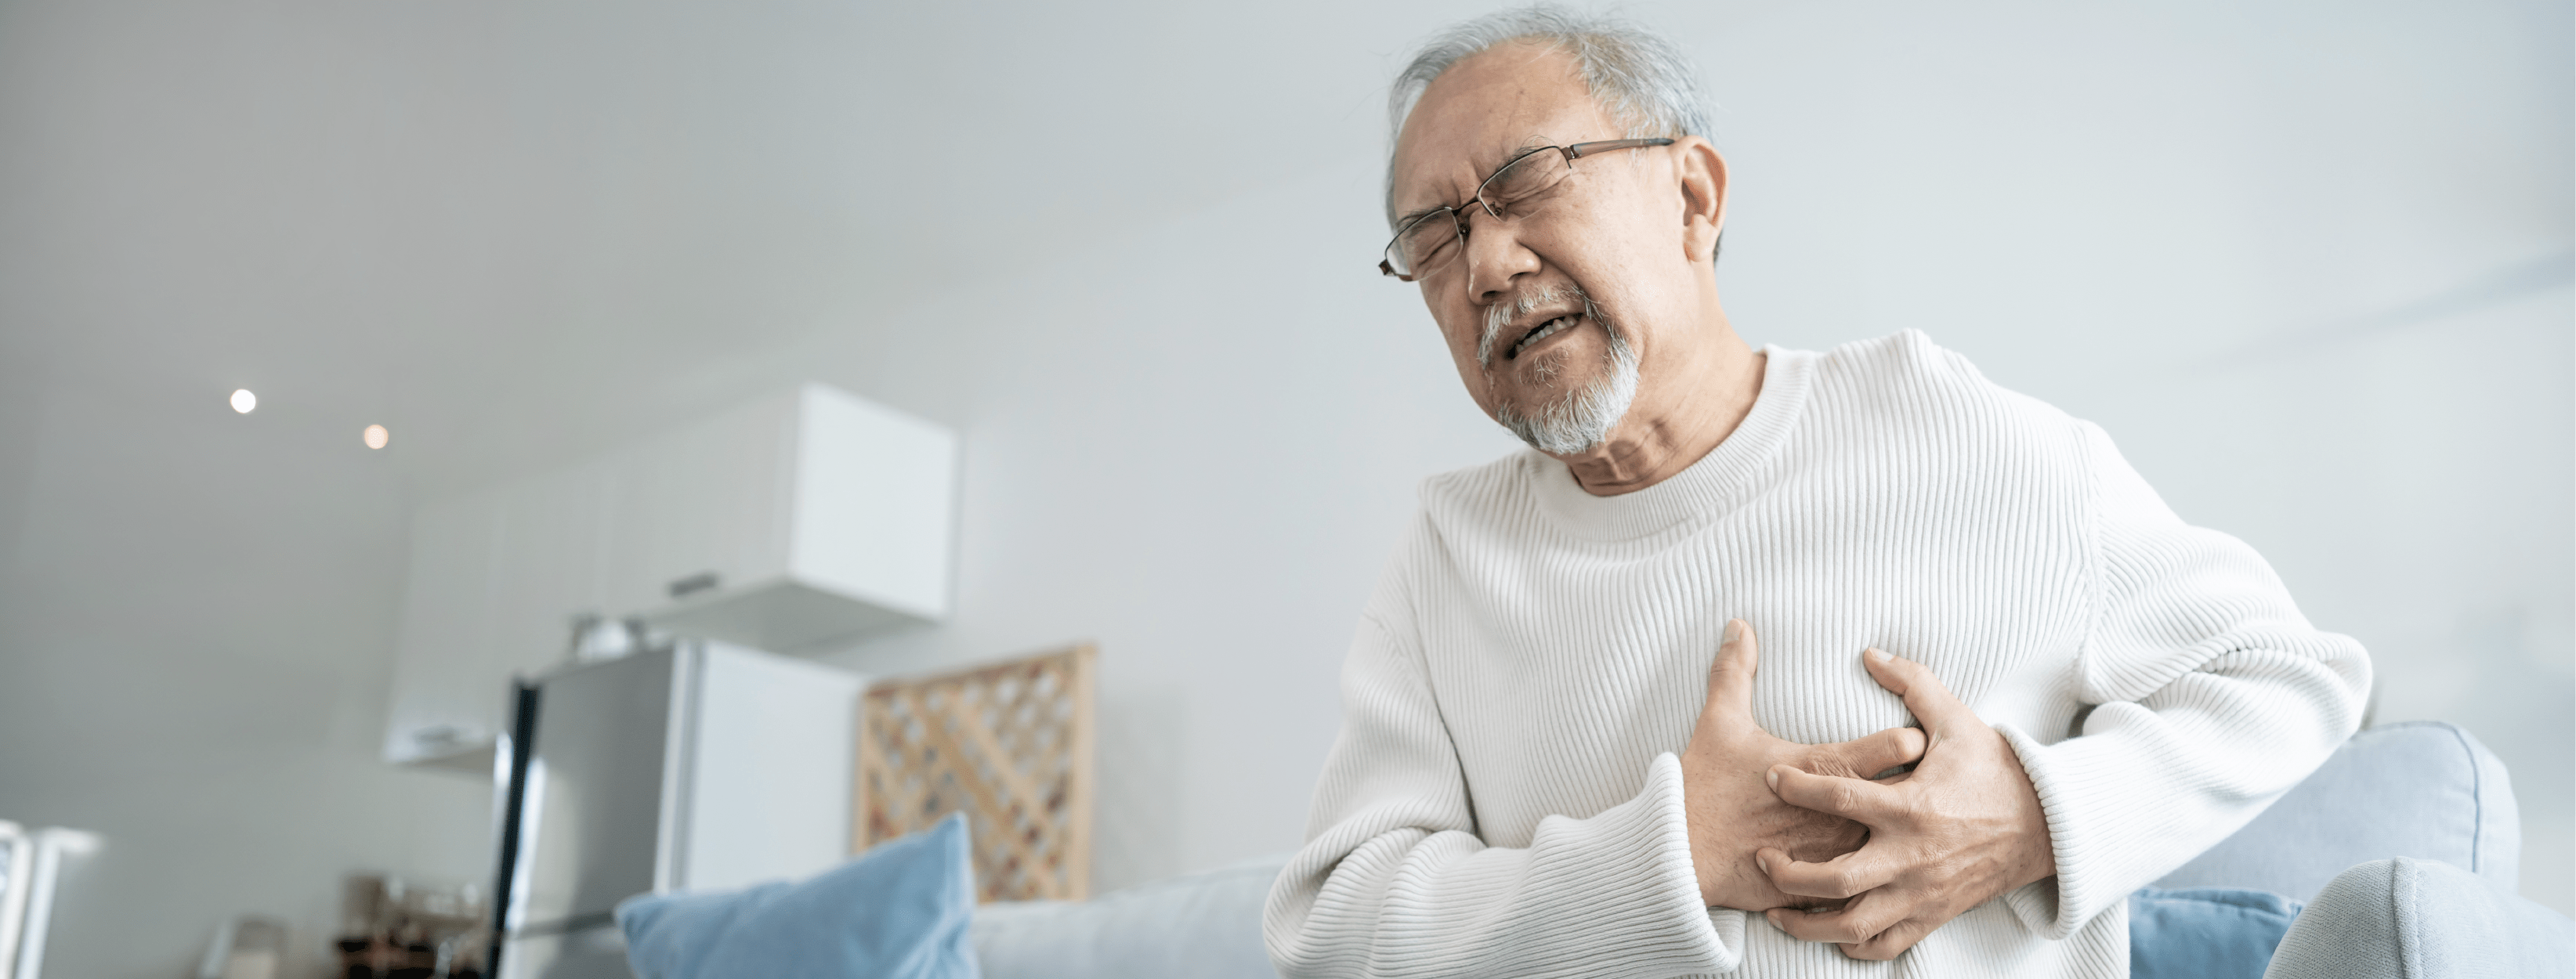 Man suffering heart disease from air quality